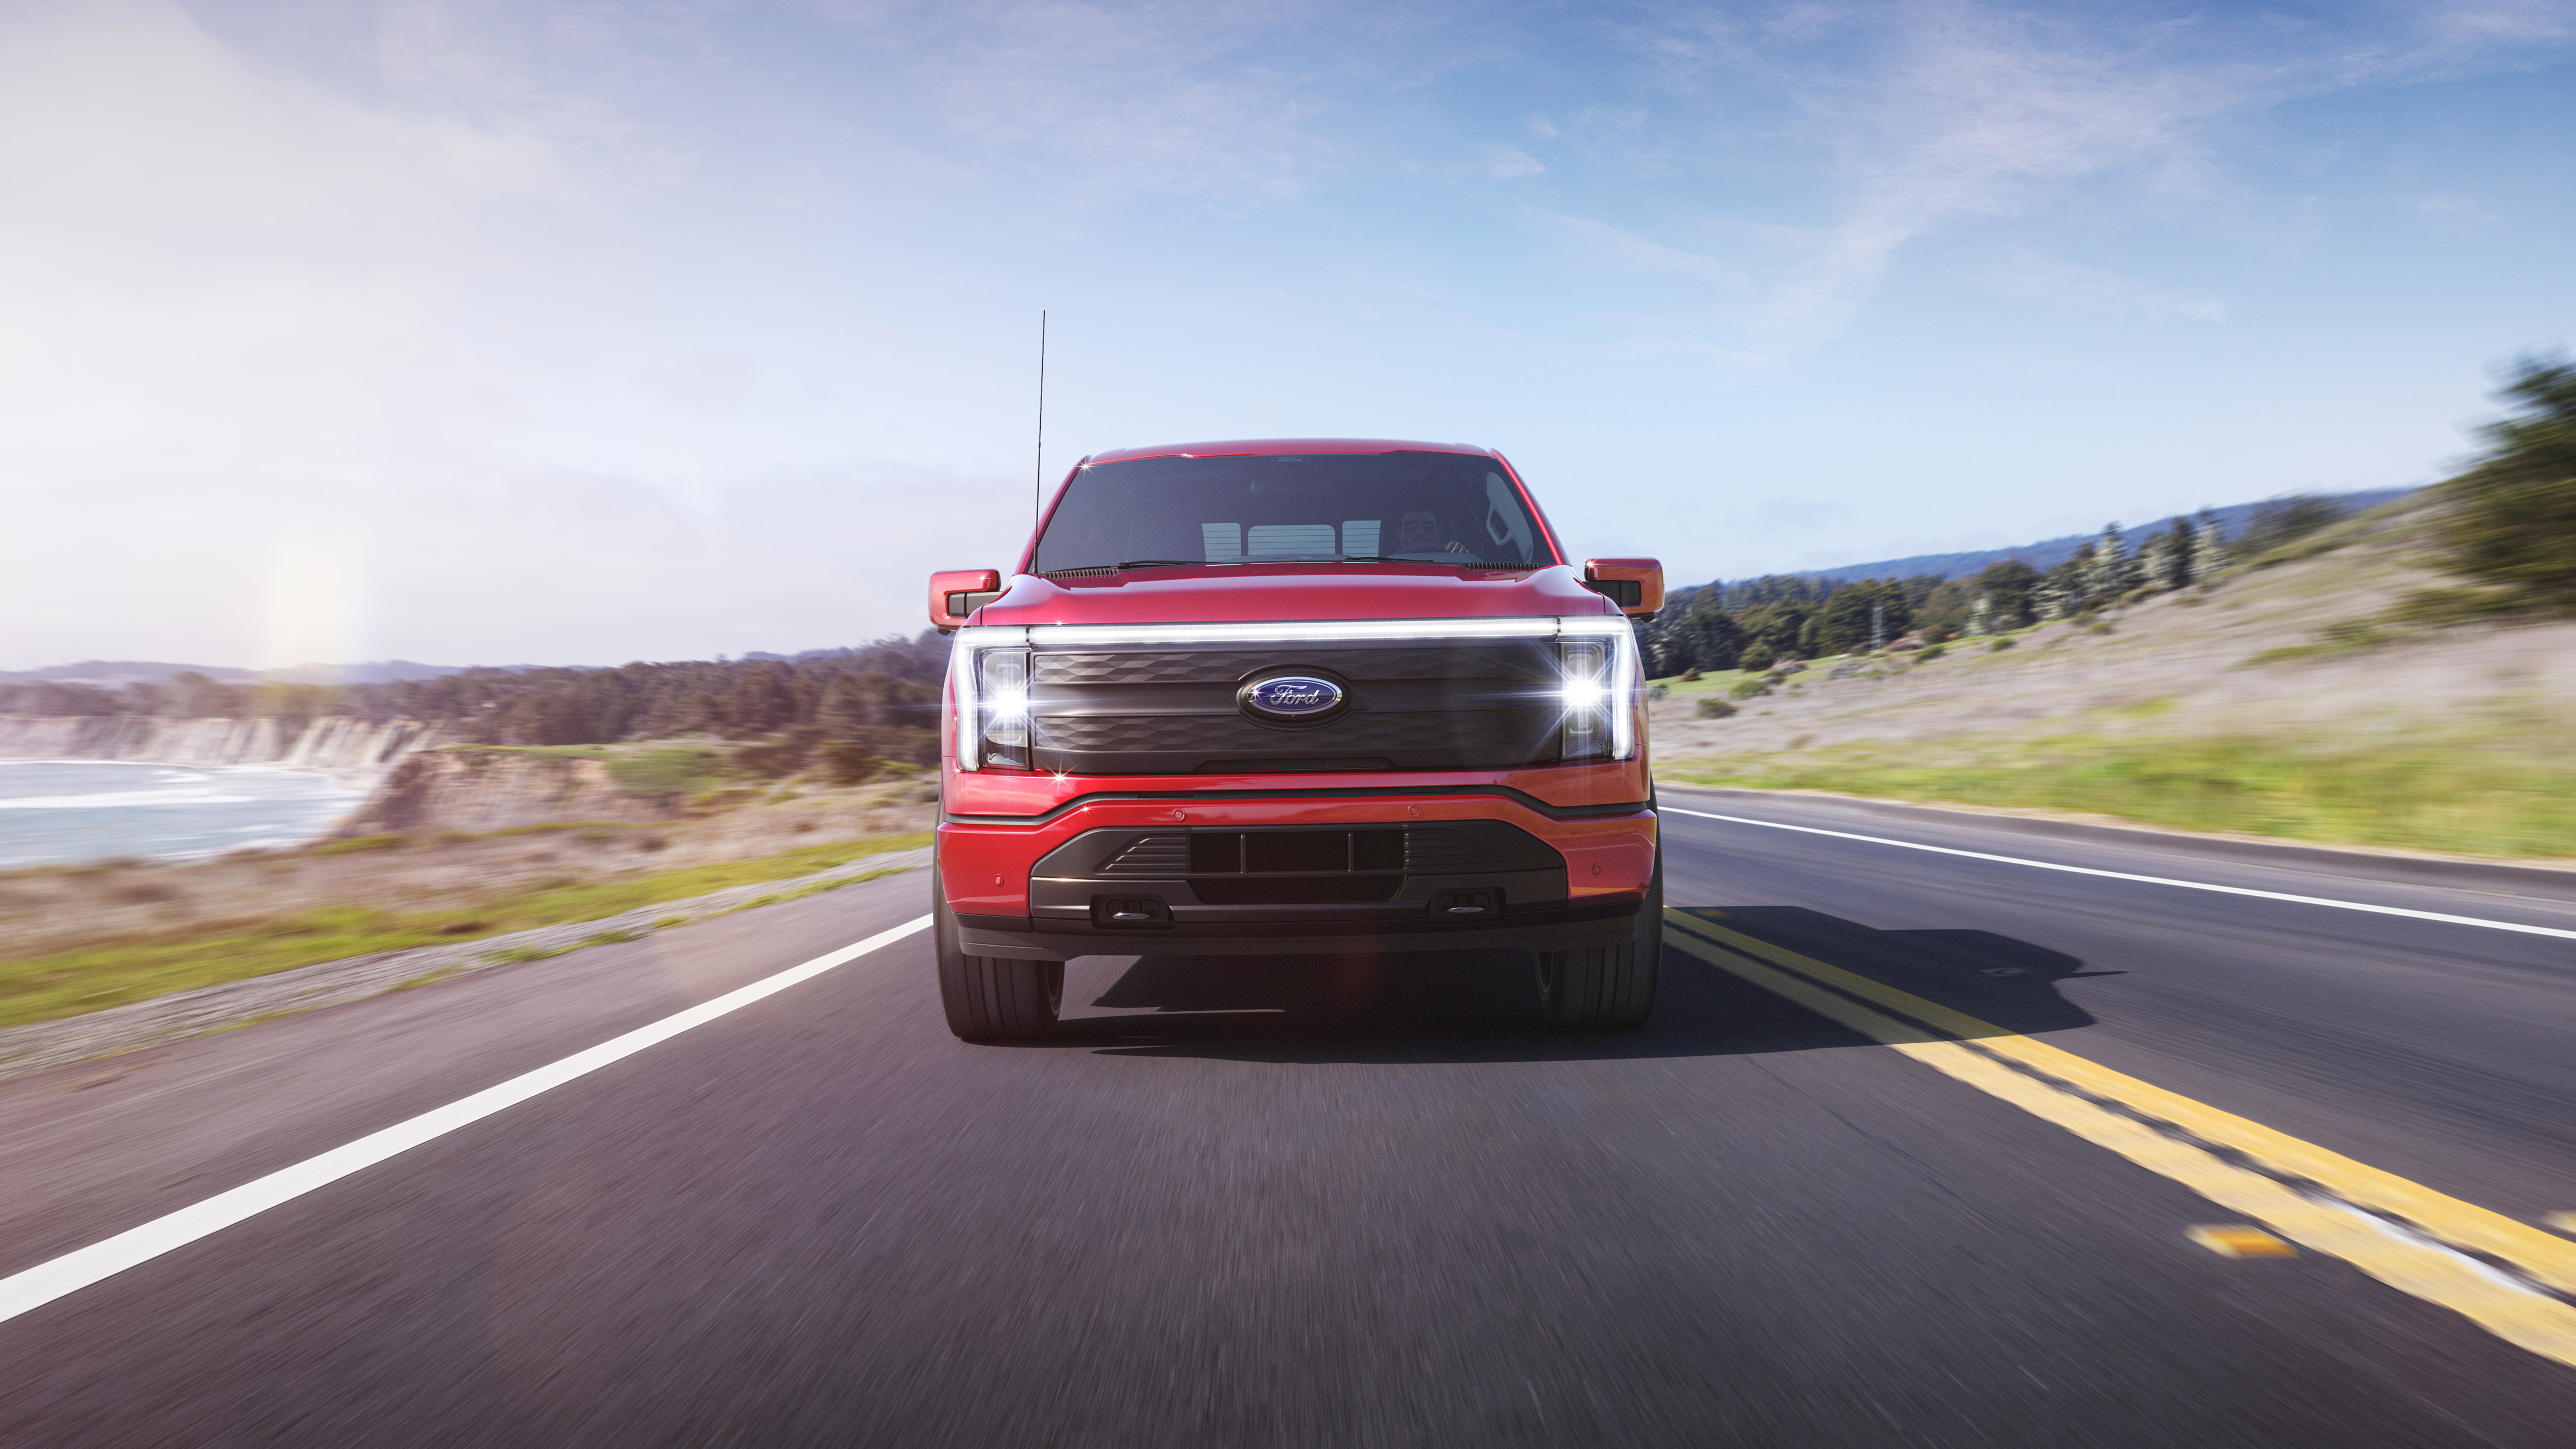 2022 Ford F-150 Lightning Lariat. Pre-production model with available features shown. Available starting spring 2022.